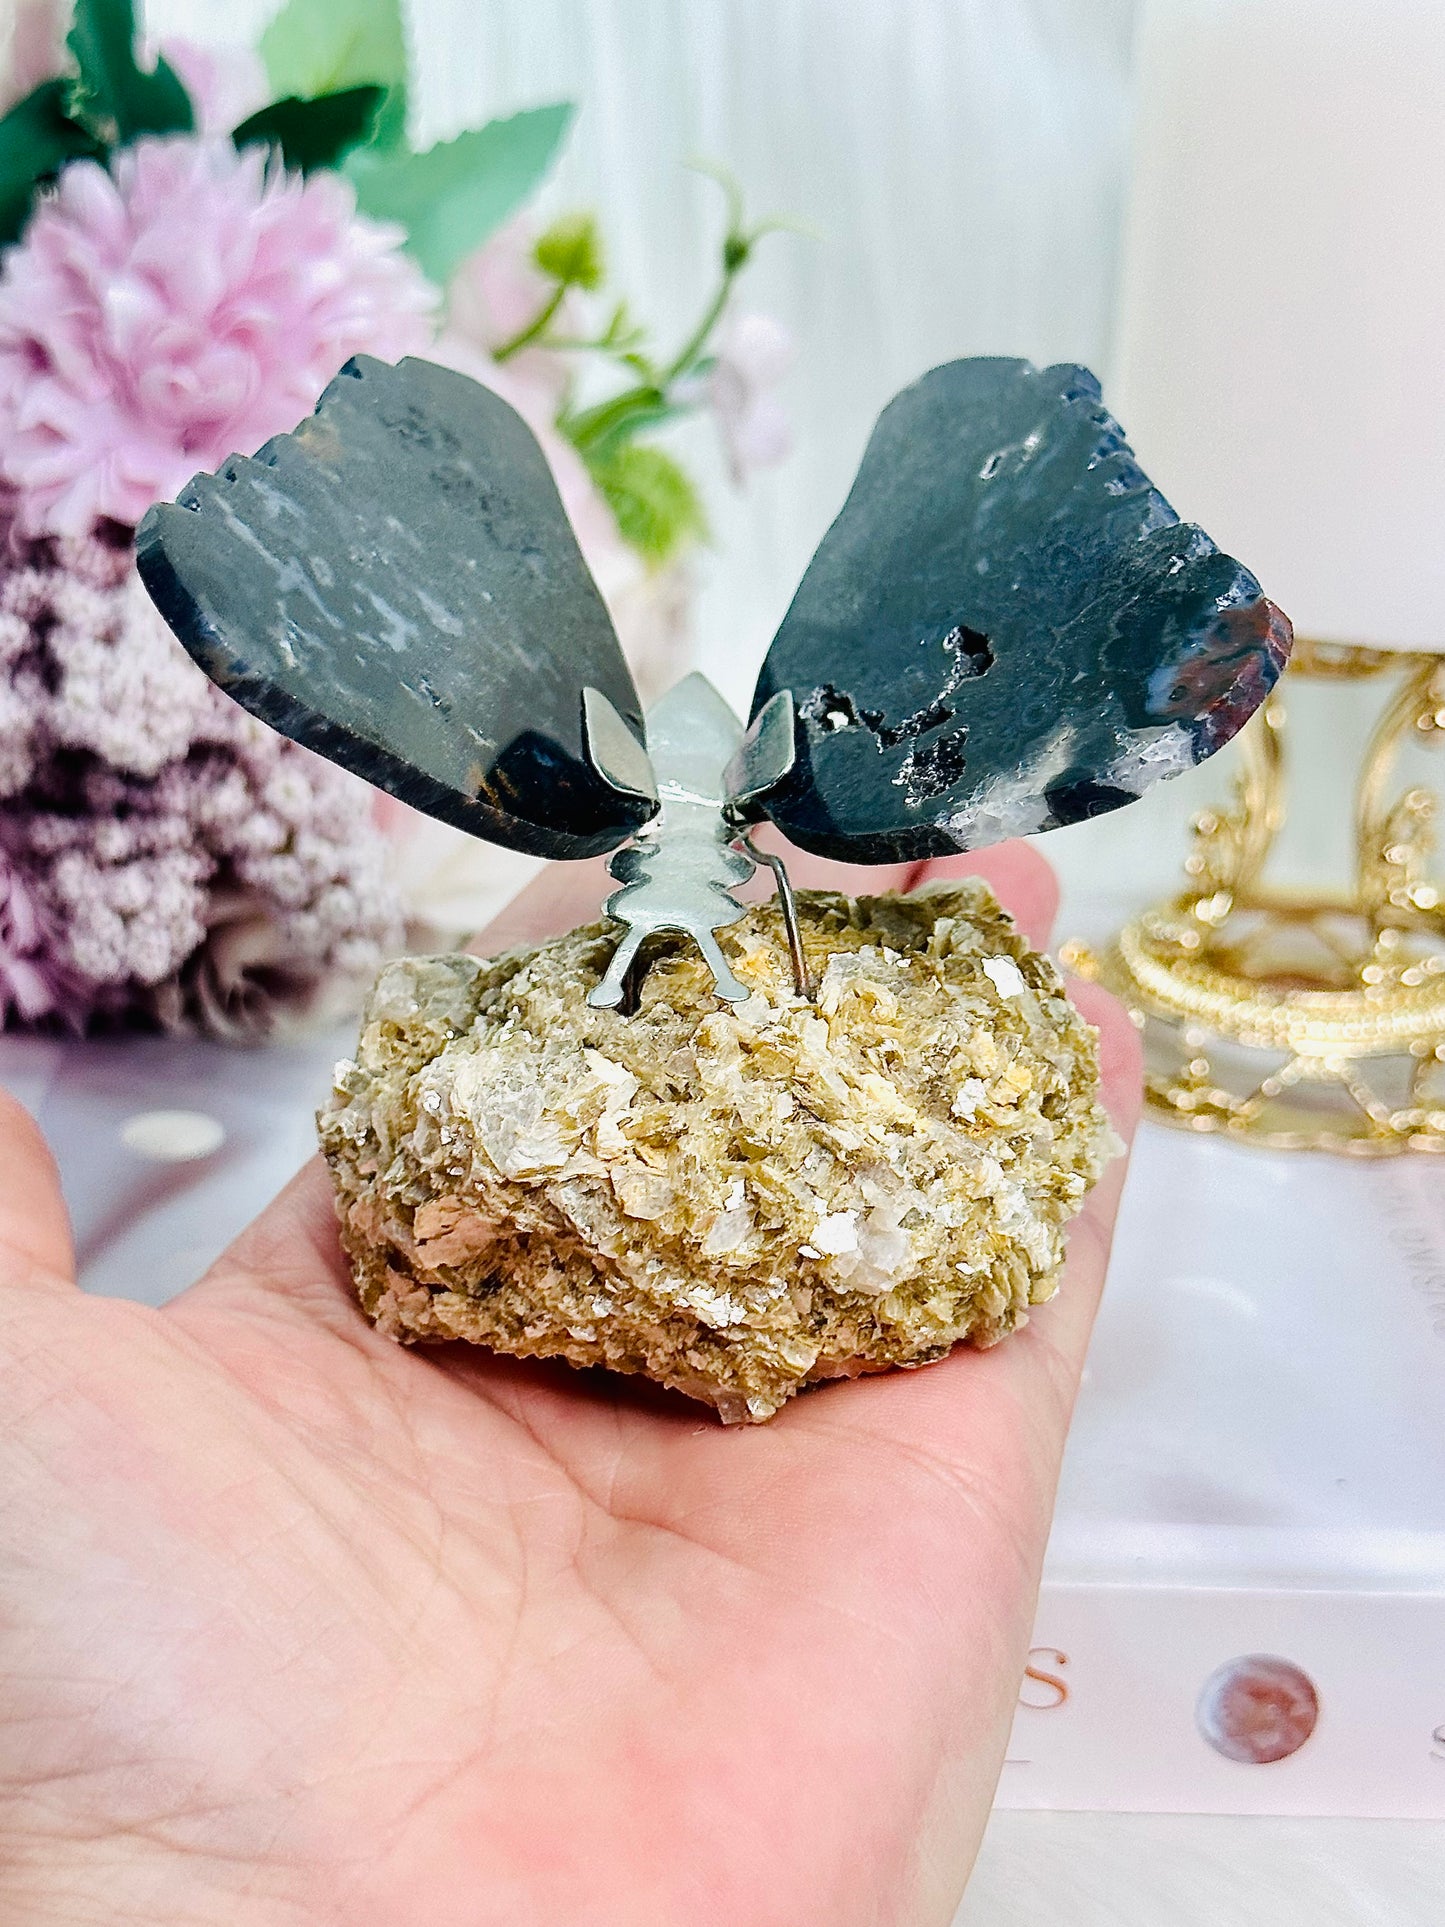 Stunning Druzy Agate Butterfly on Gold Mica Specimen